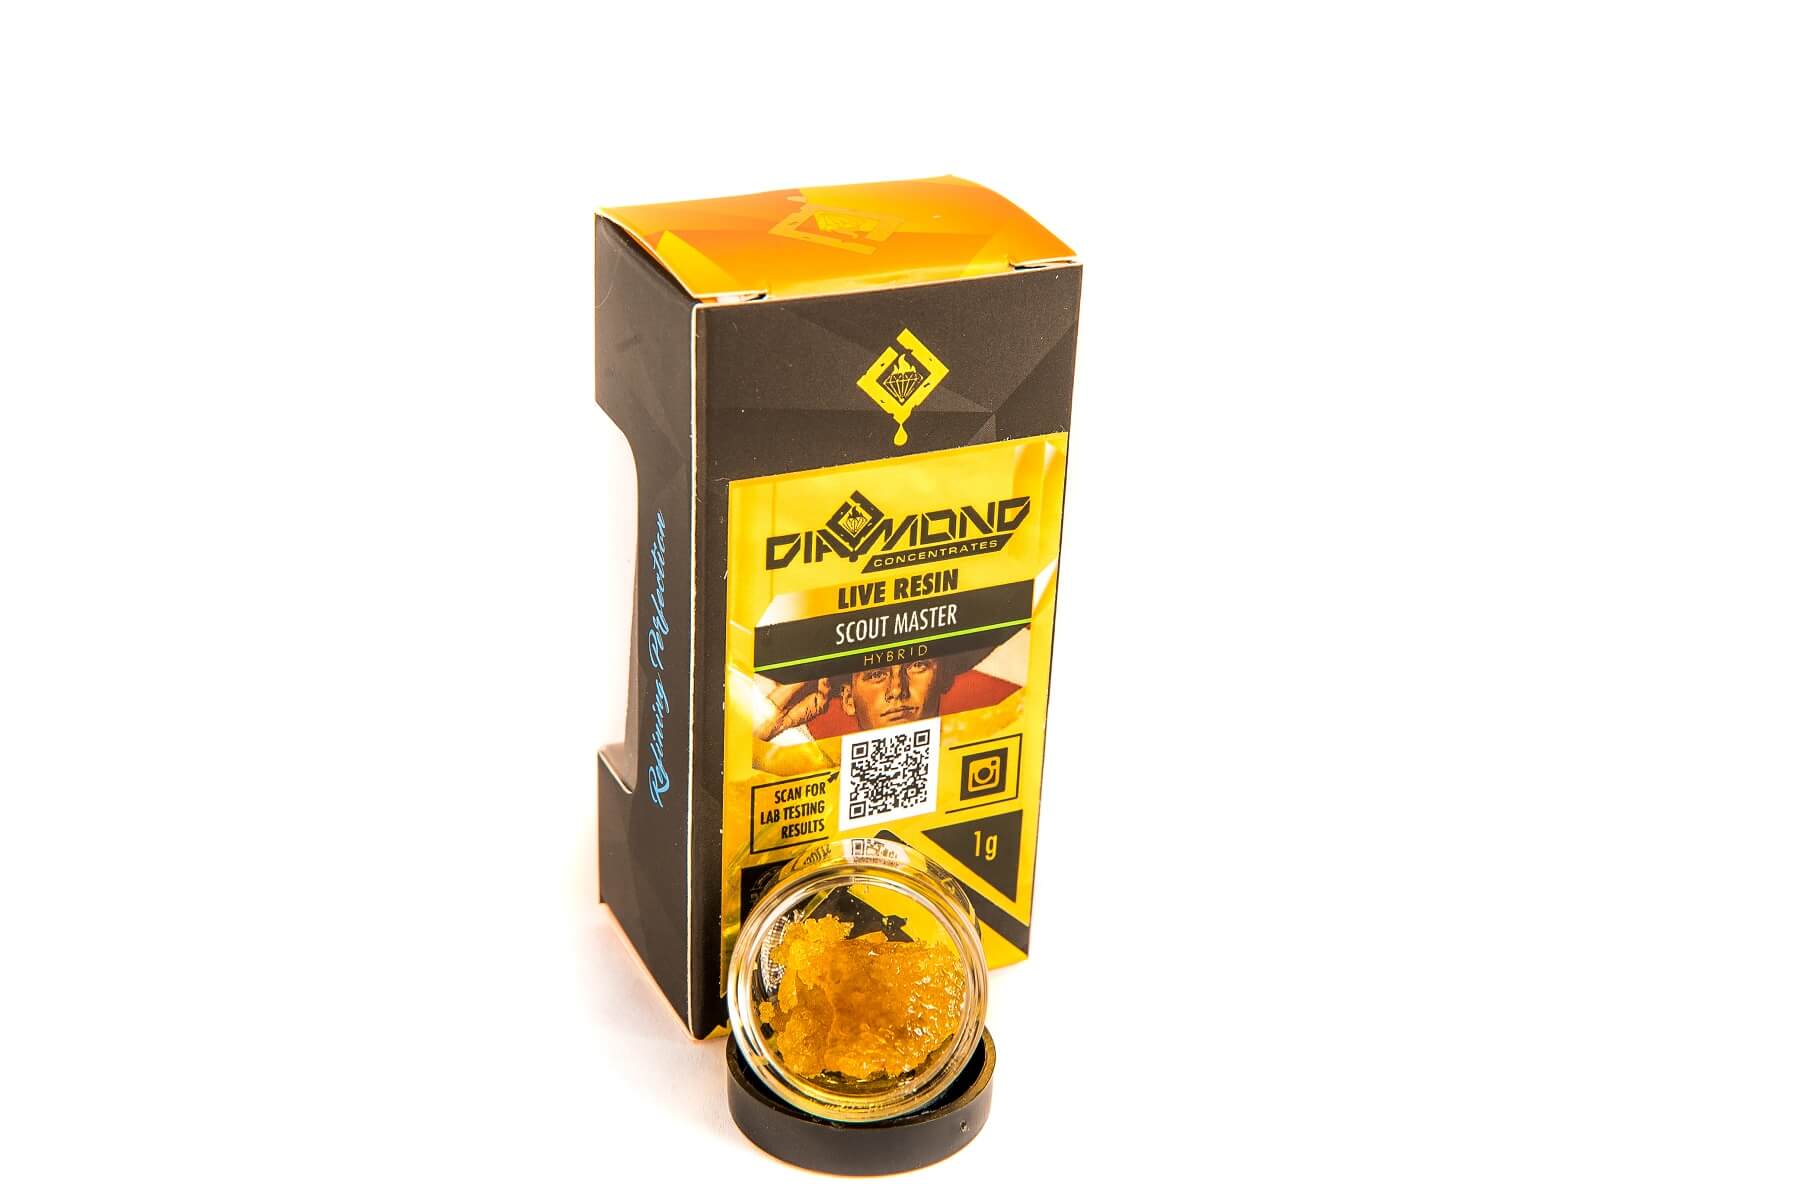 Live Resin Scout Master Diamond Concentrates